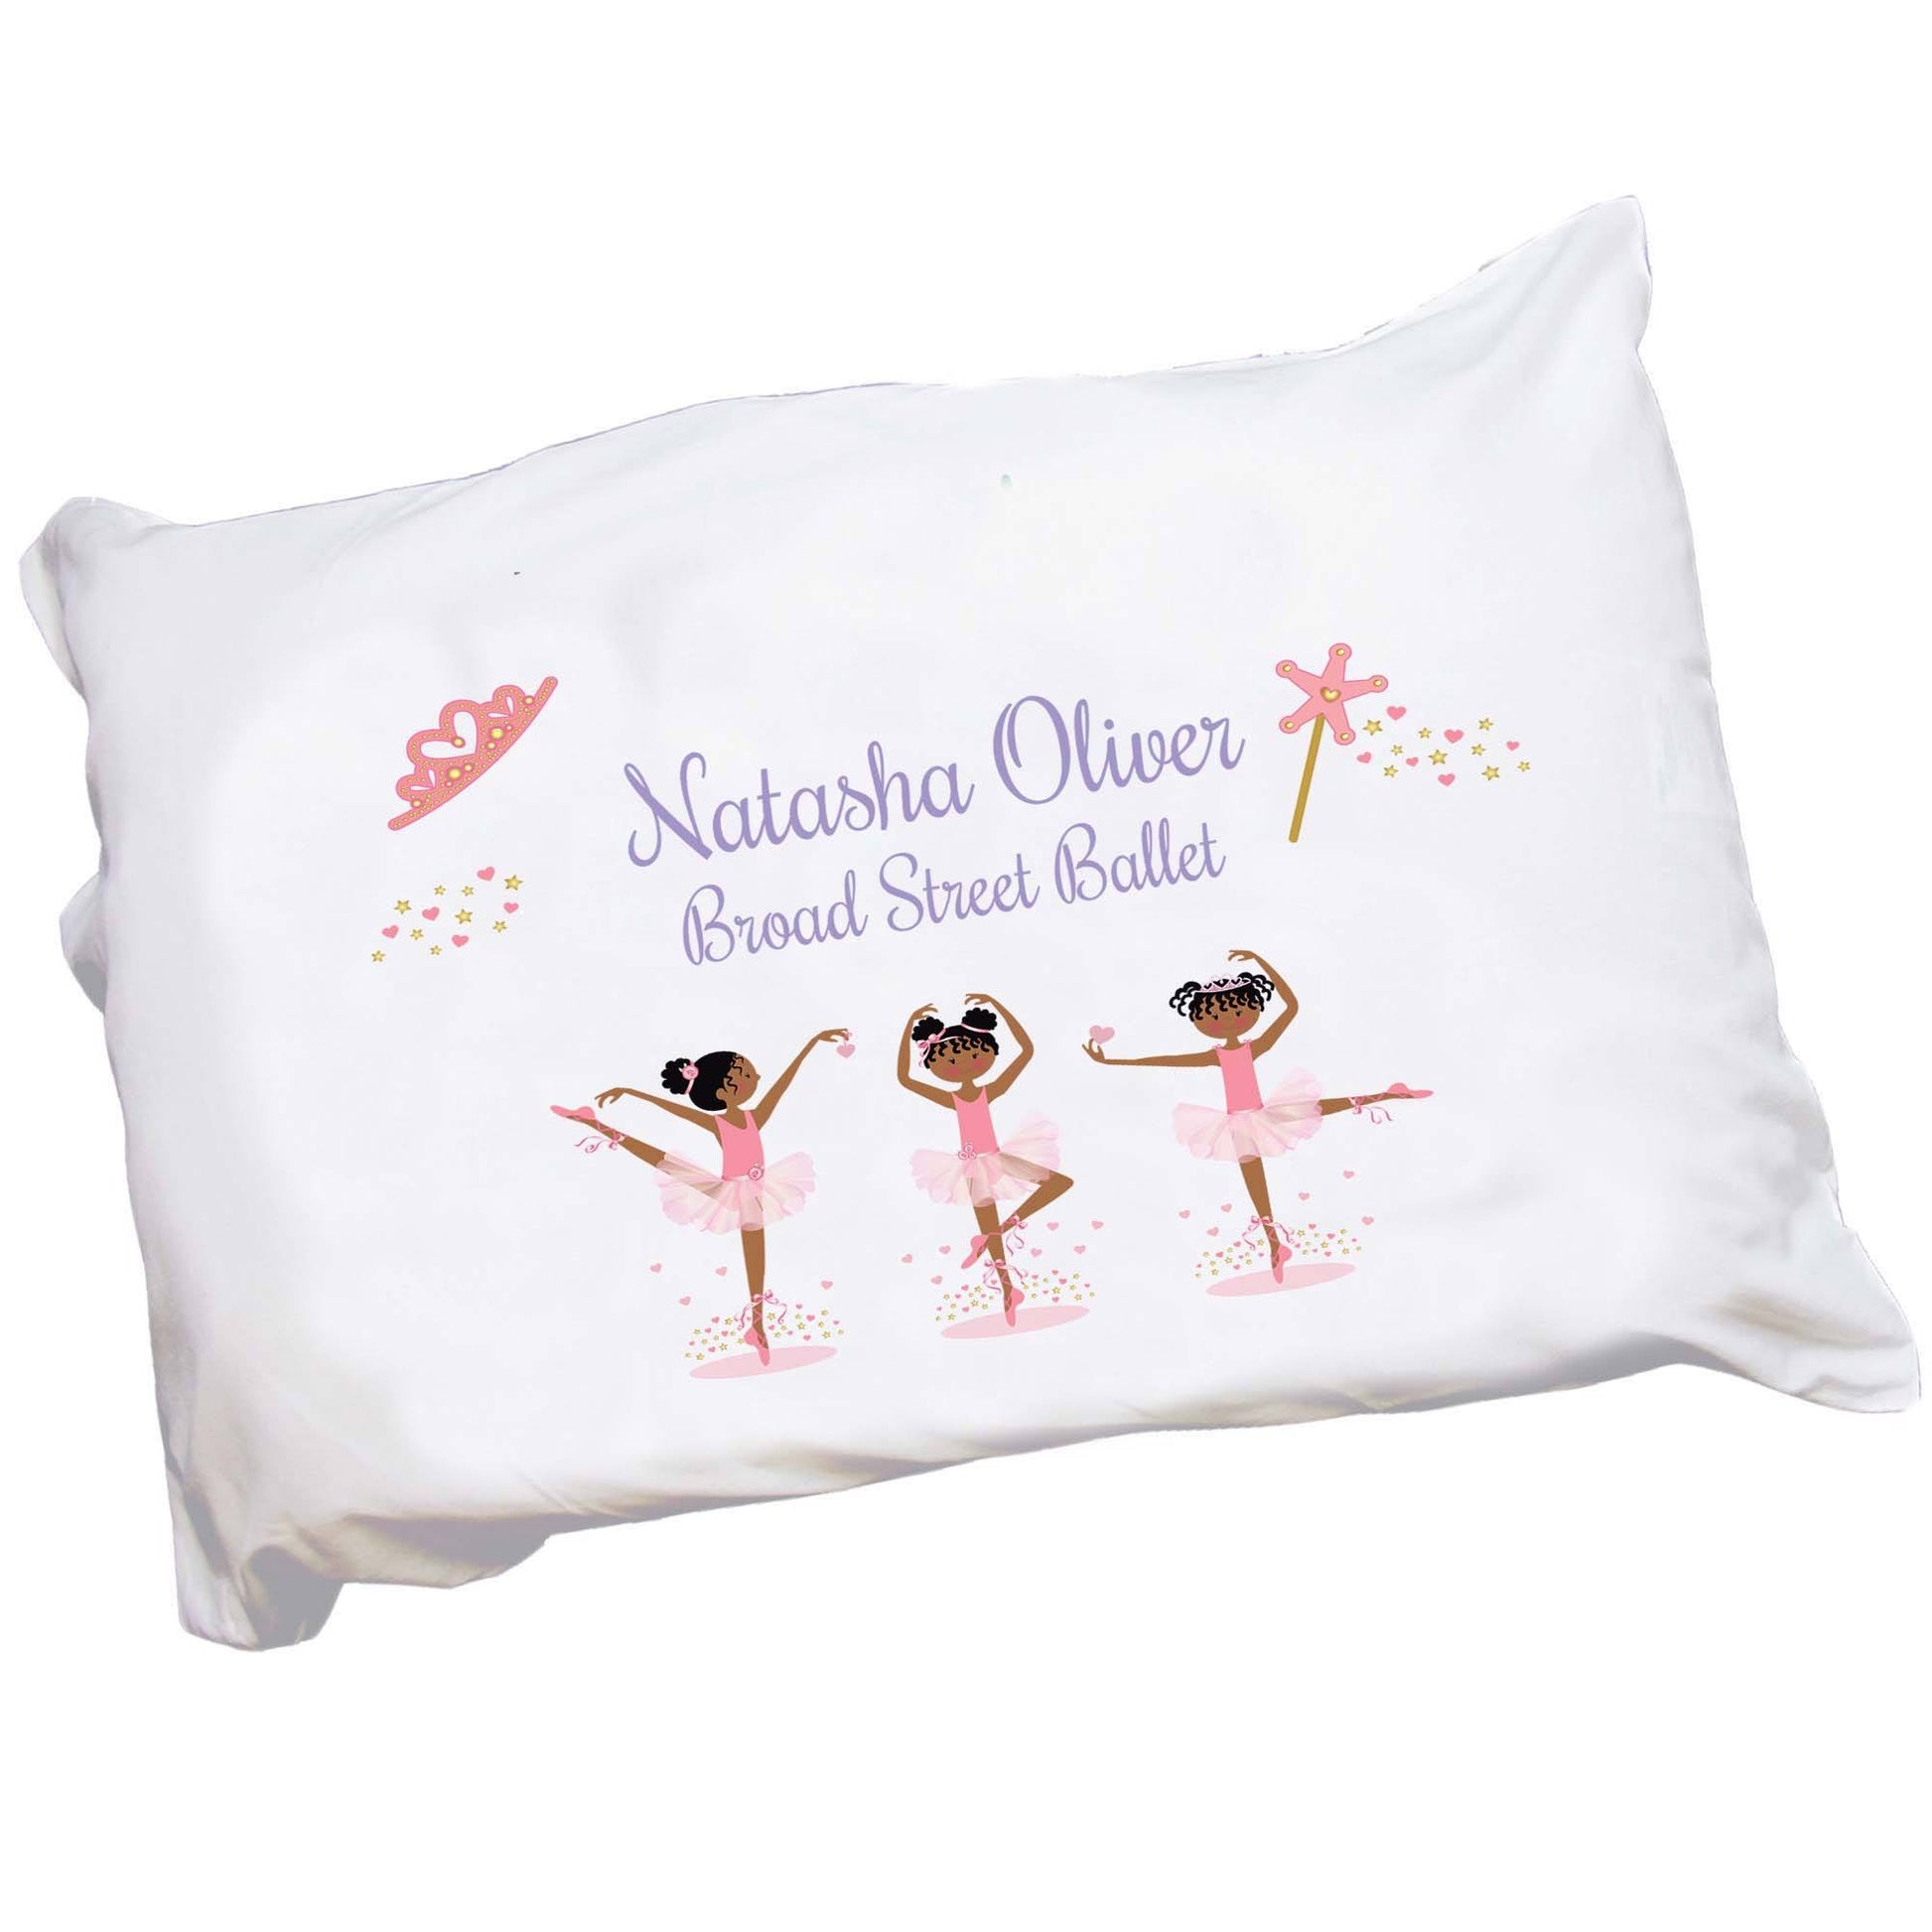 Personalized Childrens Pillowcase with Ballerina African American design